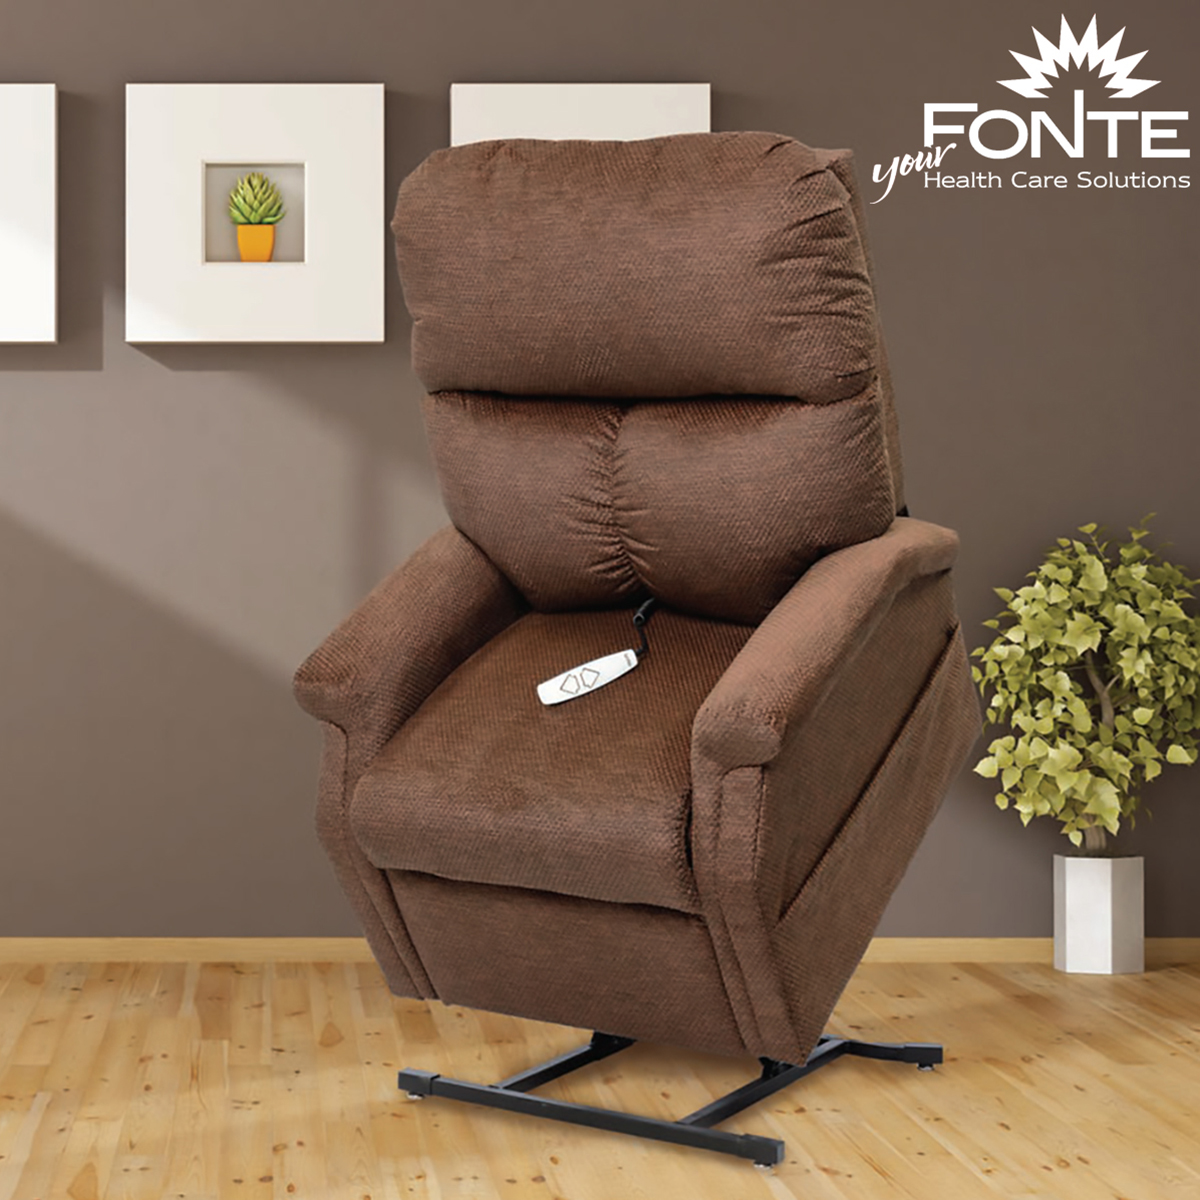 We carry a wide variety of stylish, comfortable lift chairs in many sizes, from petite to wide. Your insurance coverage may help with a portion of the cost, so stop in so we can help you determine what's best for you.
#liftchairs #powerrecliner #healthcare #rochesterny #fontes